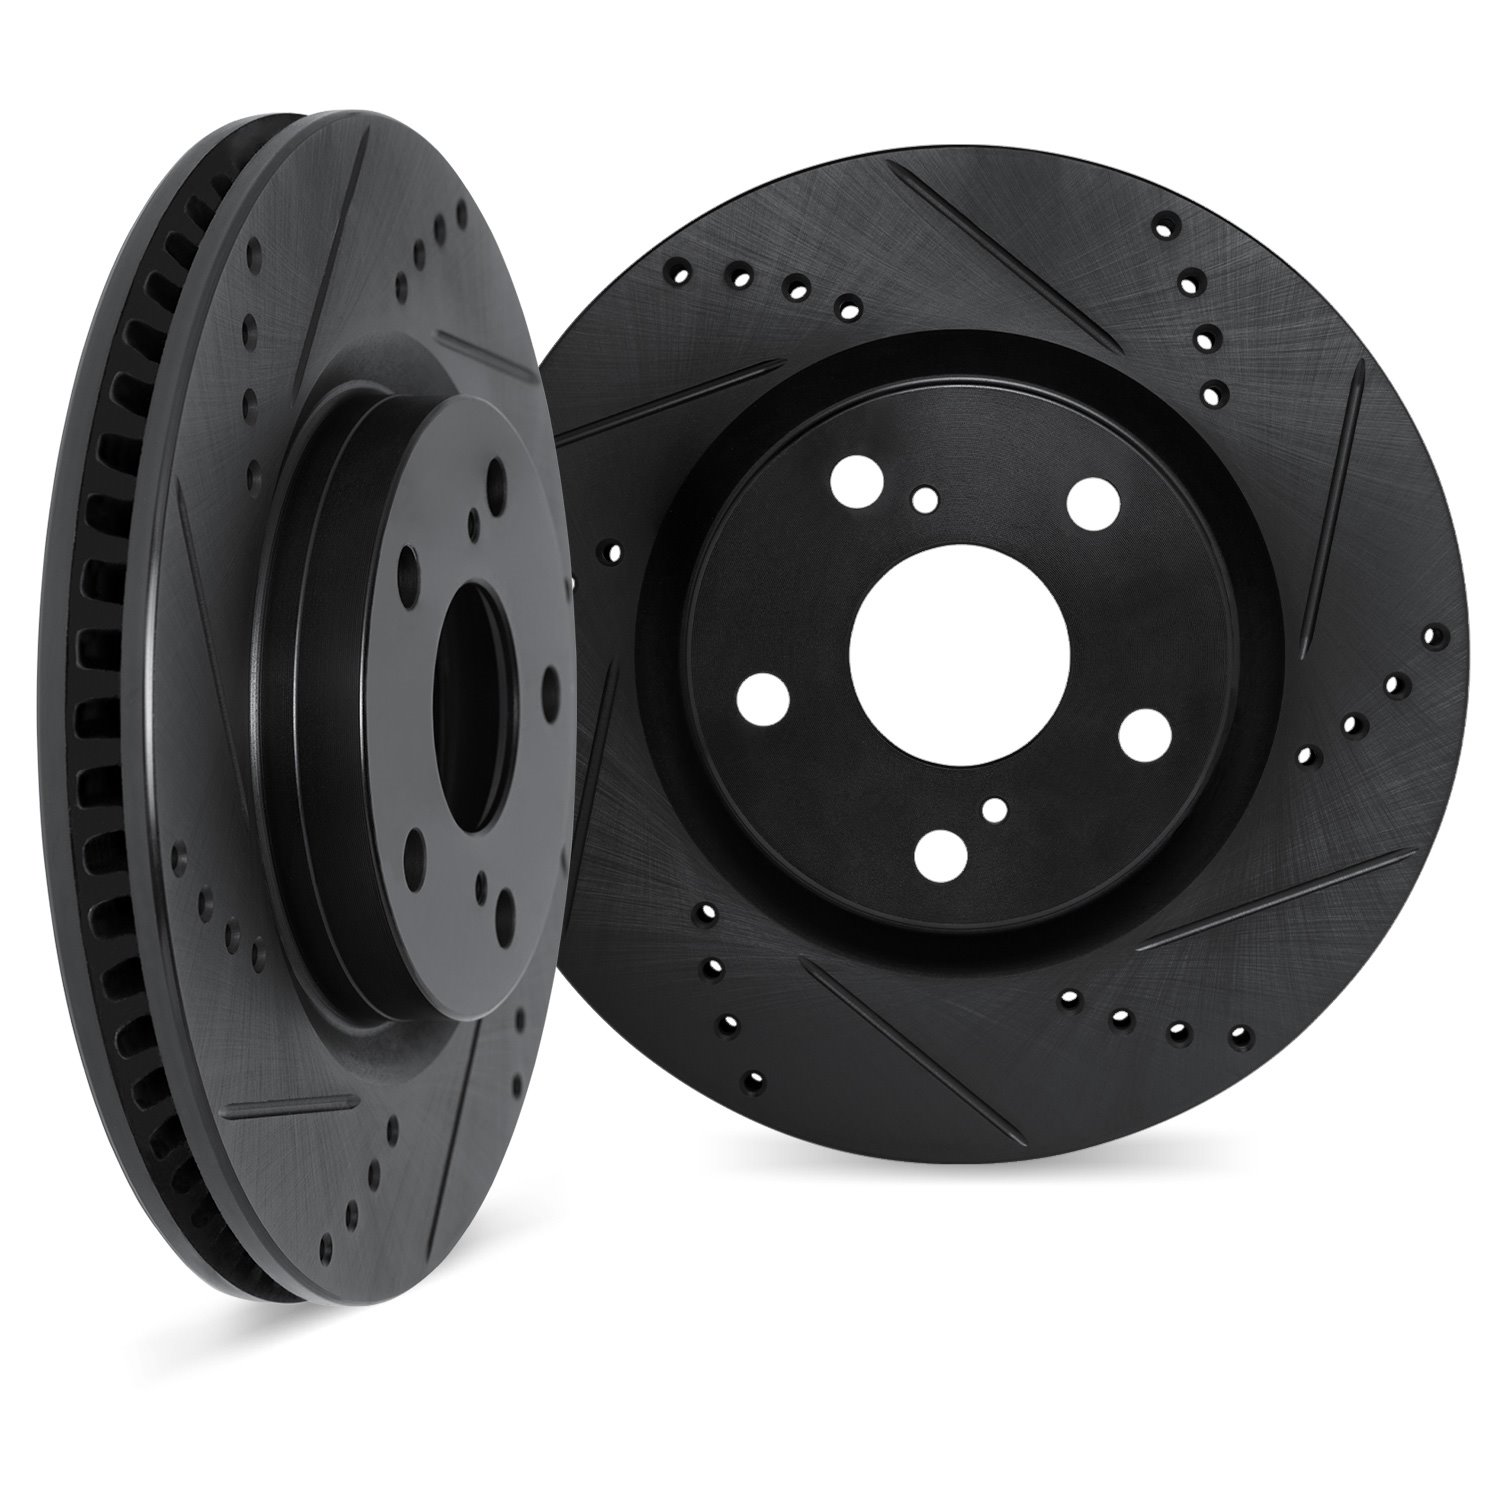 8002-75010 Drilled/Slotted Brake Rotors [Black], Fits Select Lexus/Toyota/Scion, Position: Front